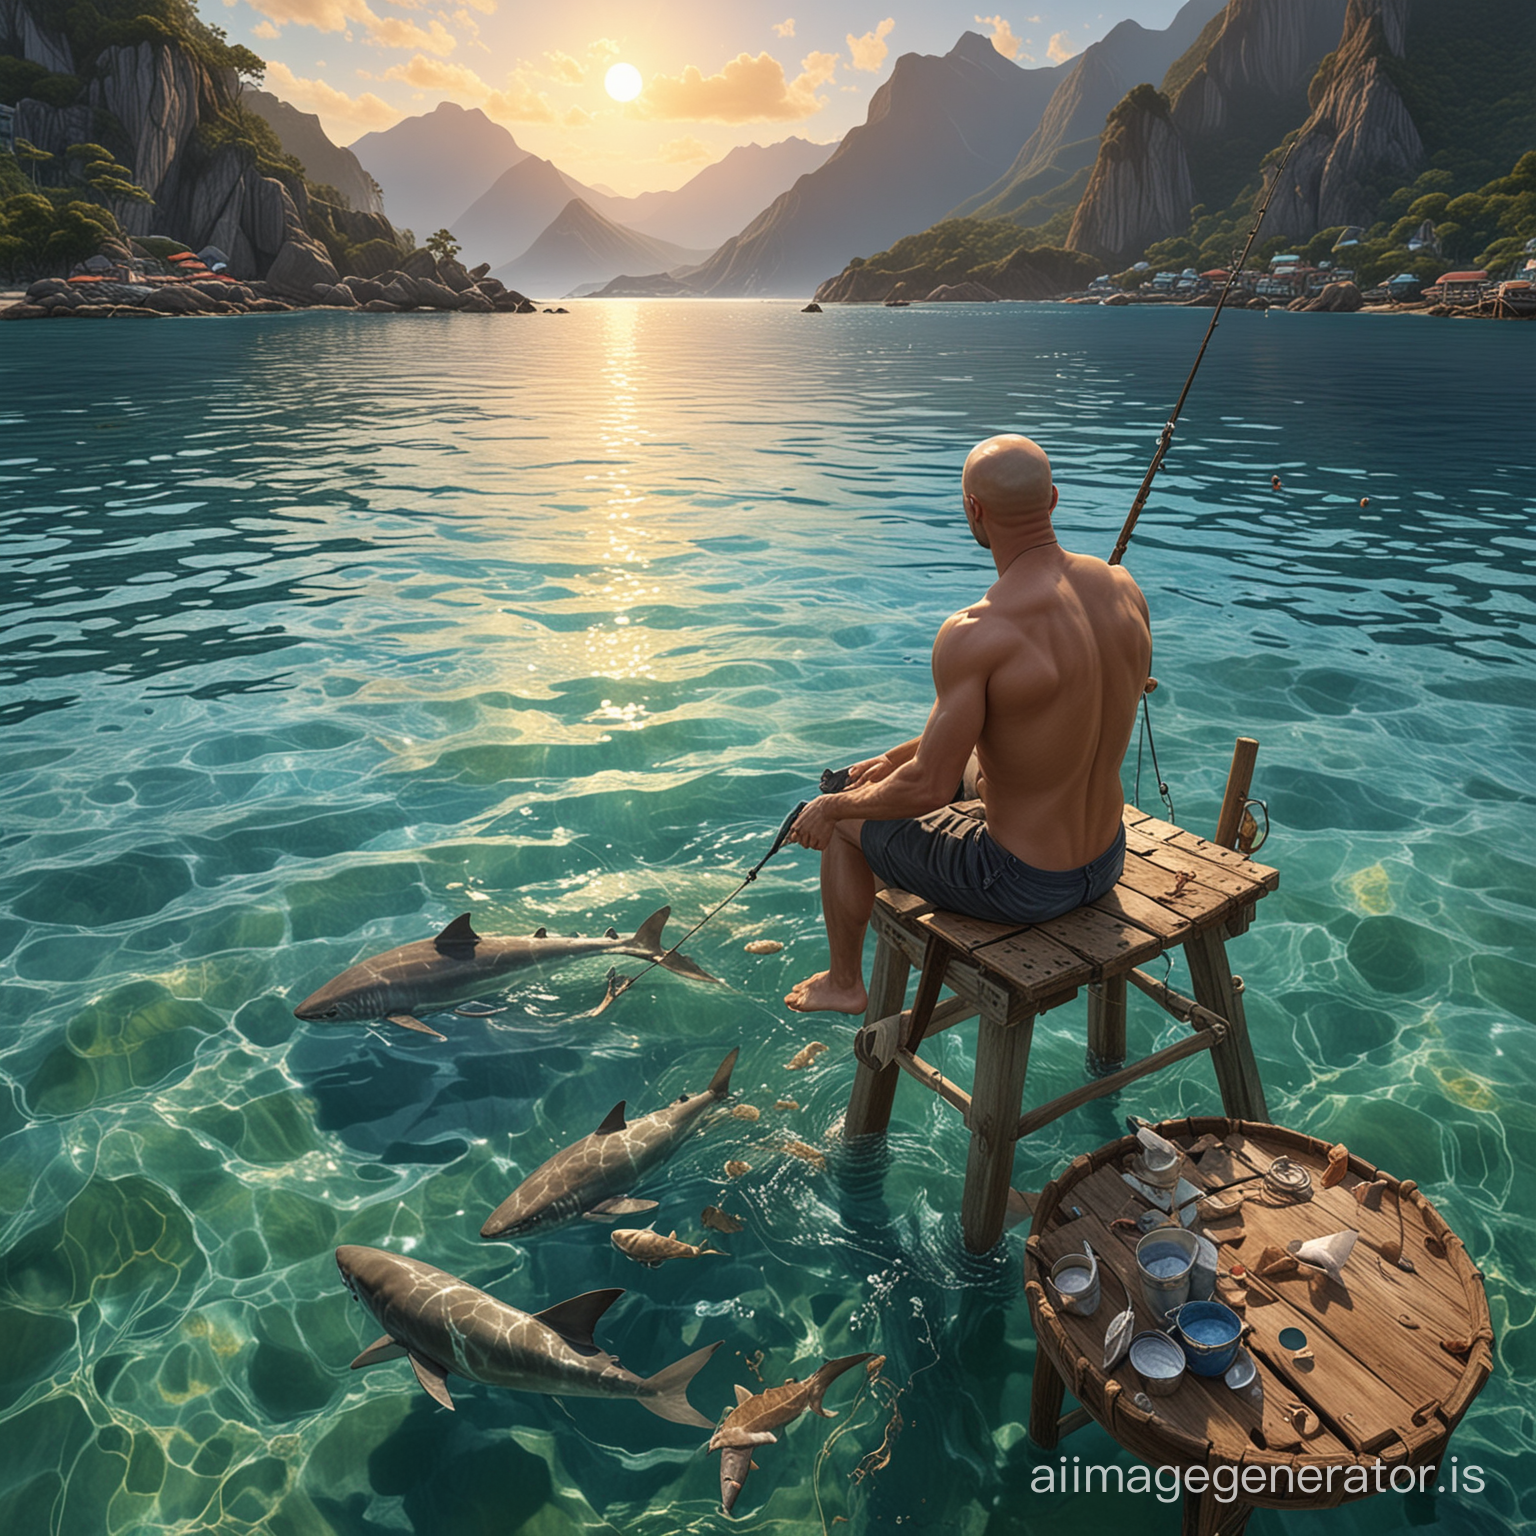 Tropical Sunset Fishing Scene Handsome Man Catching Fish on Wooden Pier  with Shark in Clear Water